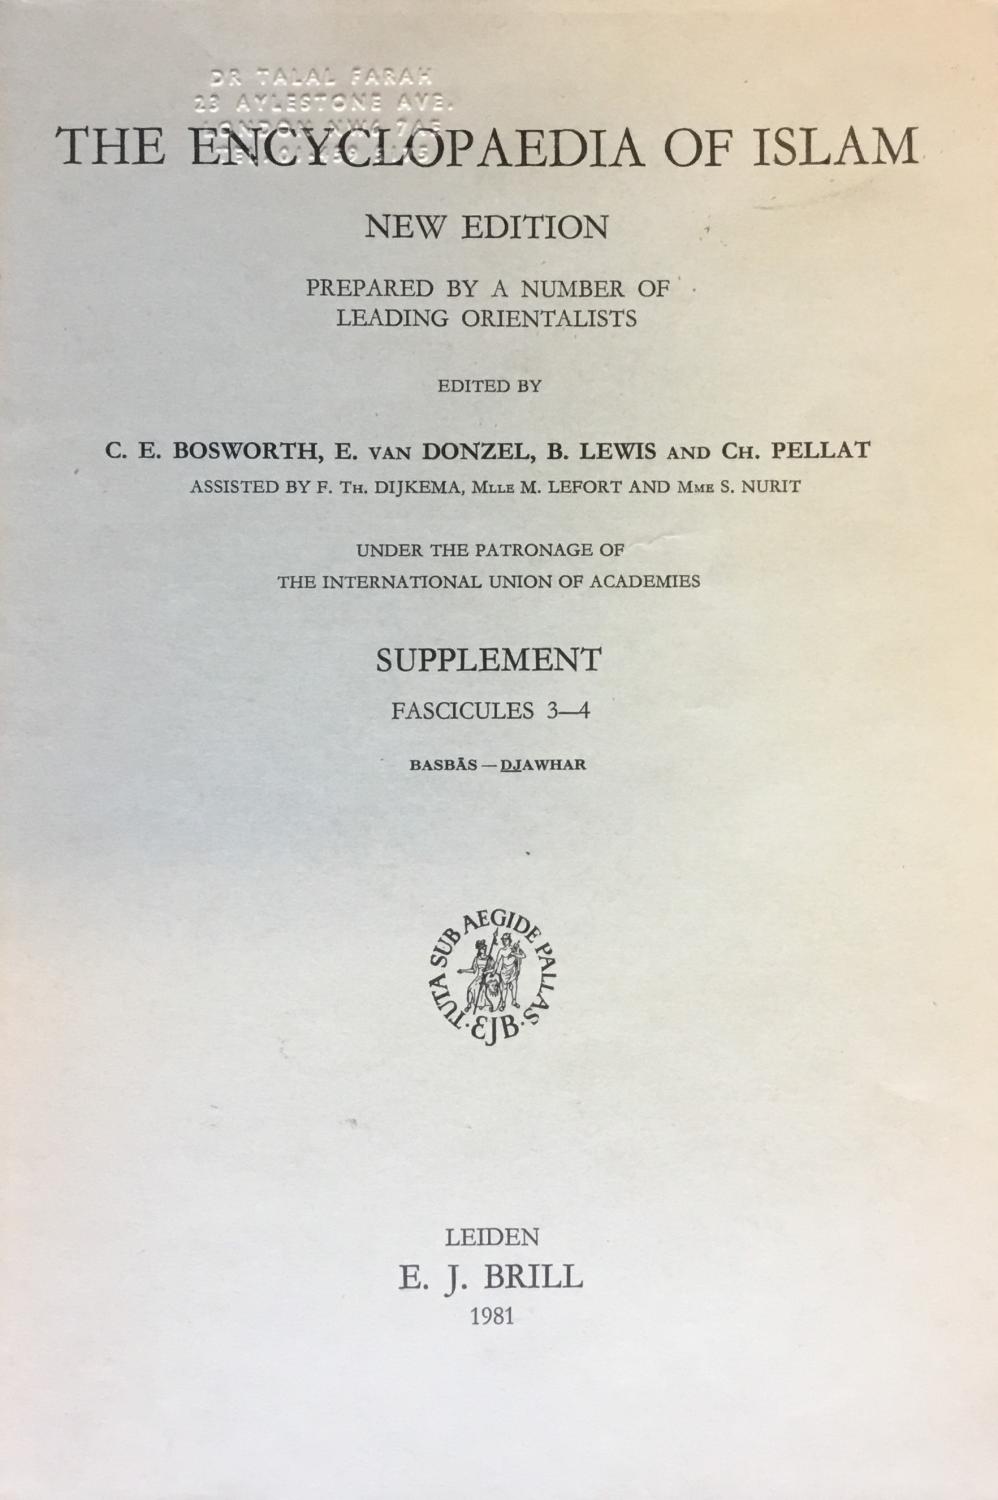 The Encyclopaedia of Islam New Edition Prepared by a Number of Leading Orientalists. Supplement Fascicules 3-4. - Bosworth, C. E./ E. van Donzel/ B. Lewis & Ch. Pellat (Editors).